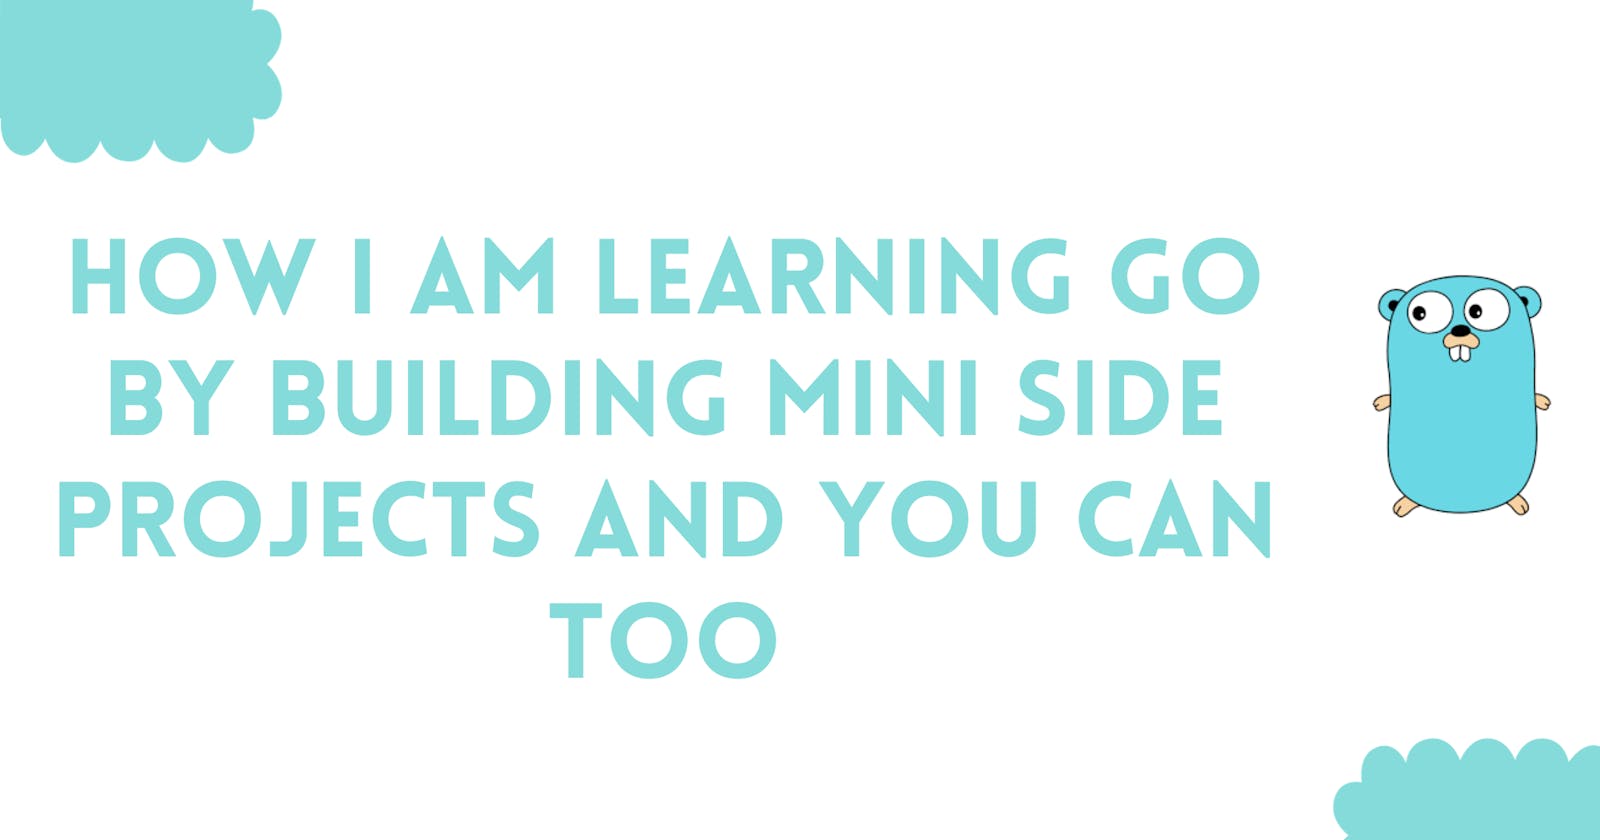 How I am learning Go by building mini side projects and you can too